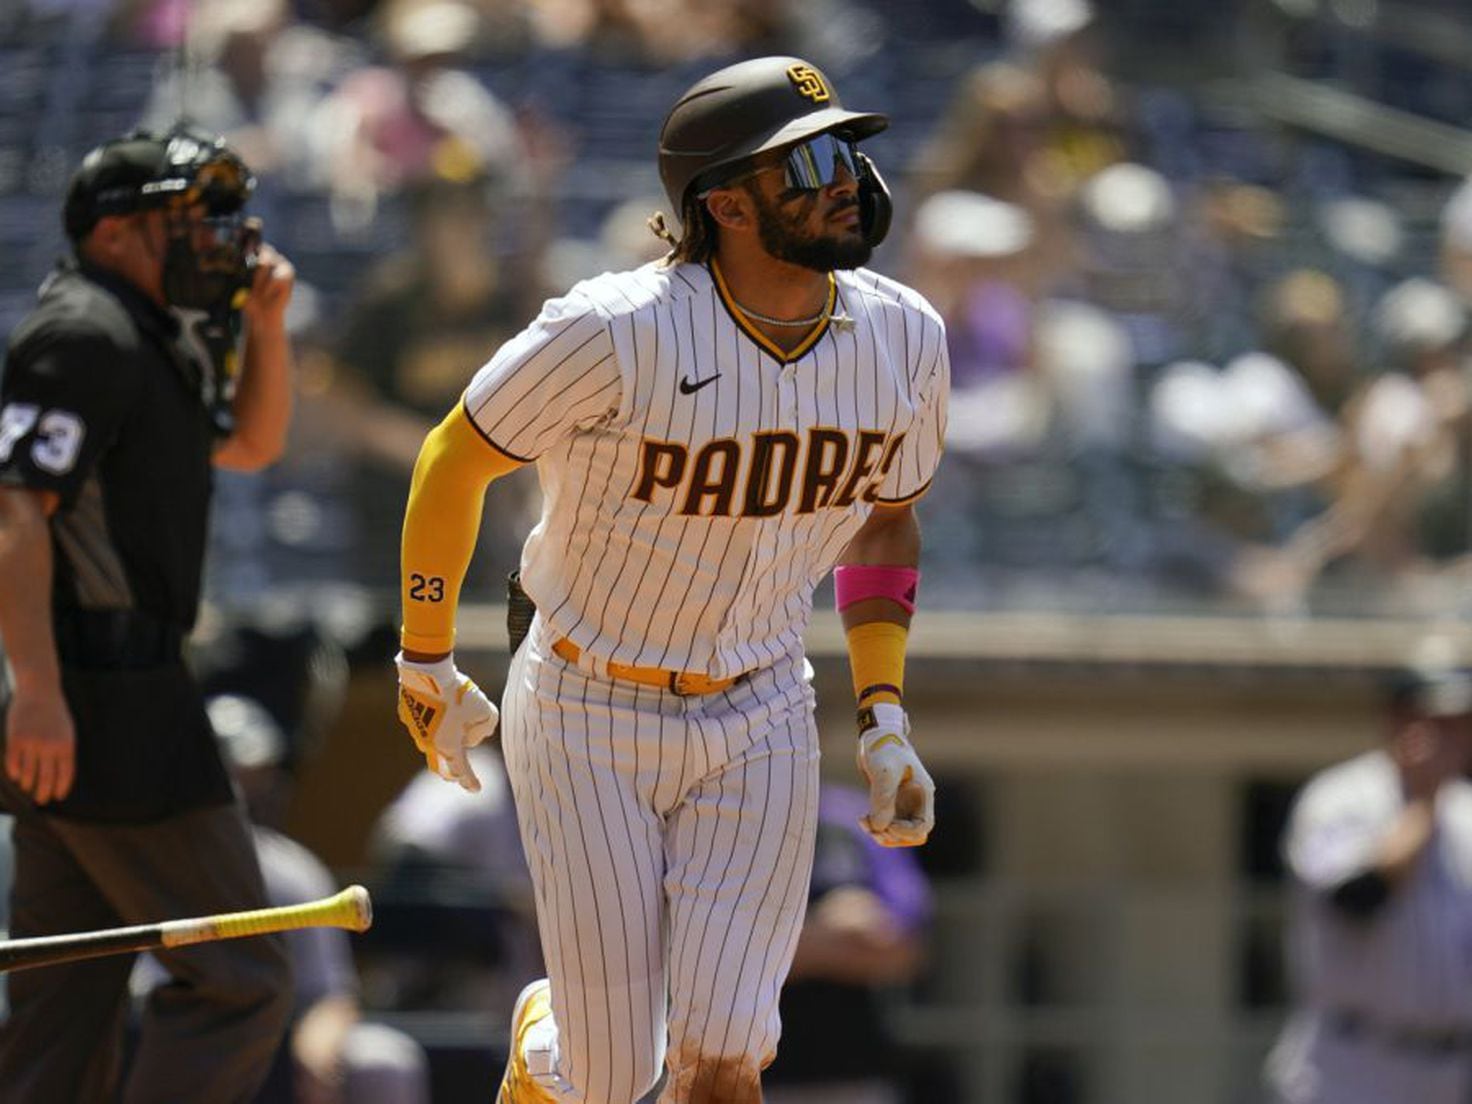 Padres vs Rangers Postgame Wrap-Up Show: Padres 5 Rangers 3 